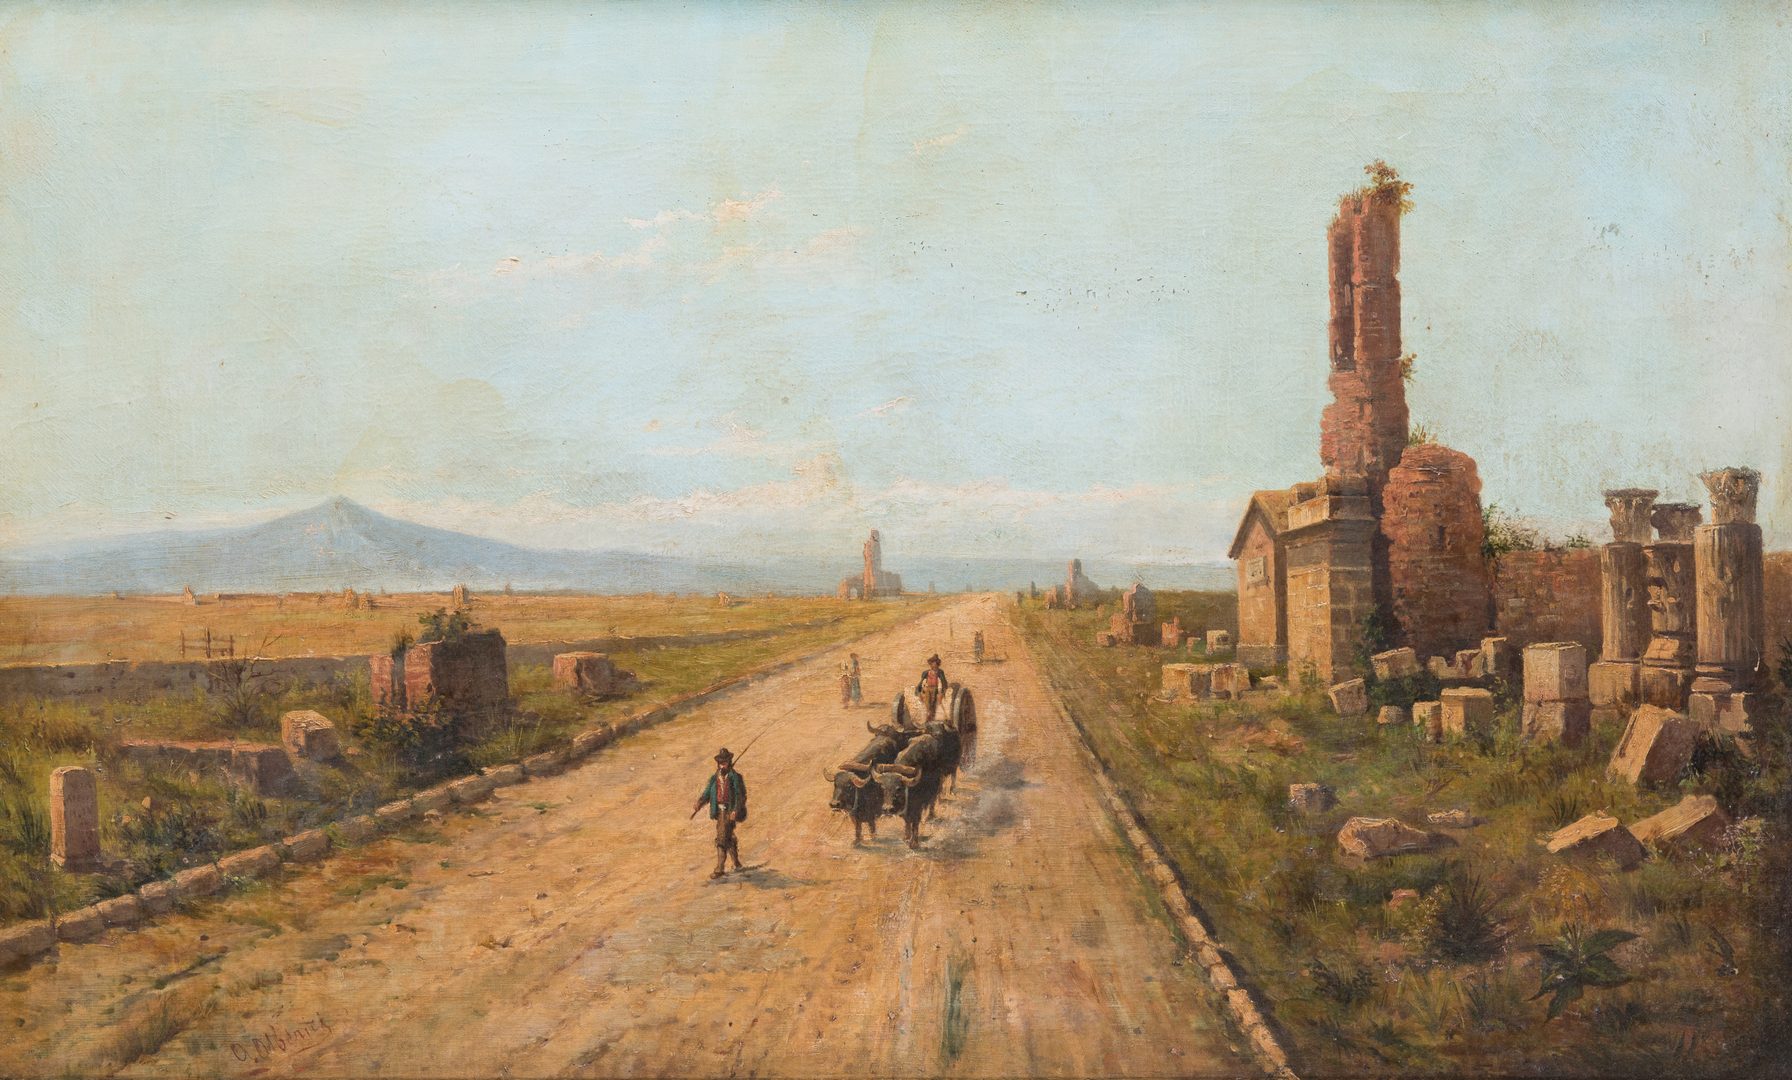 Lot 110: Signed Orientalist Landscape, Road to Damascus